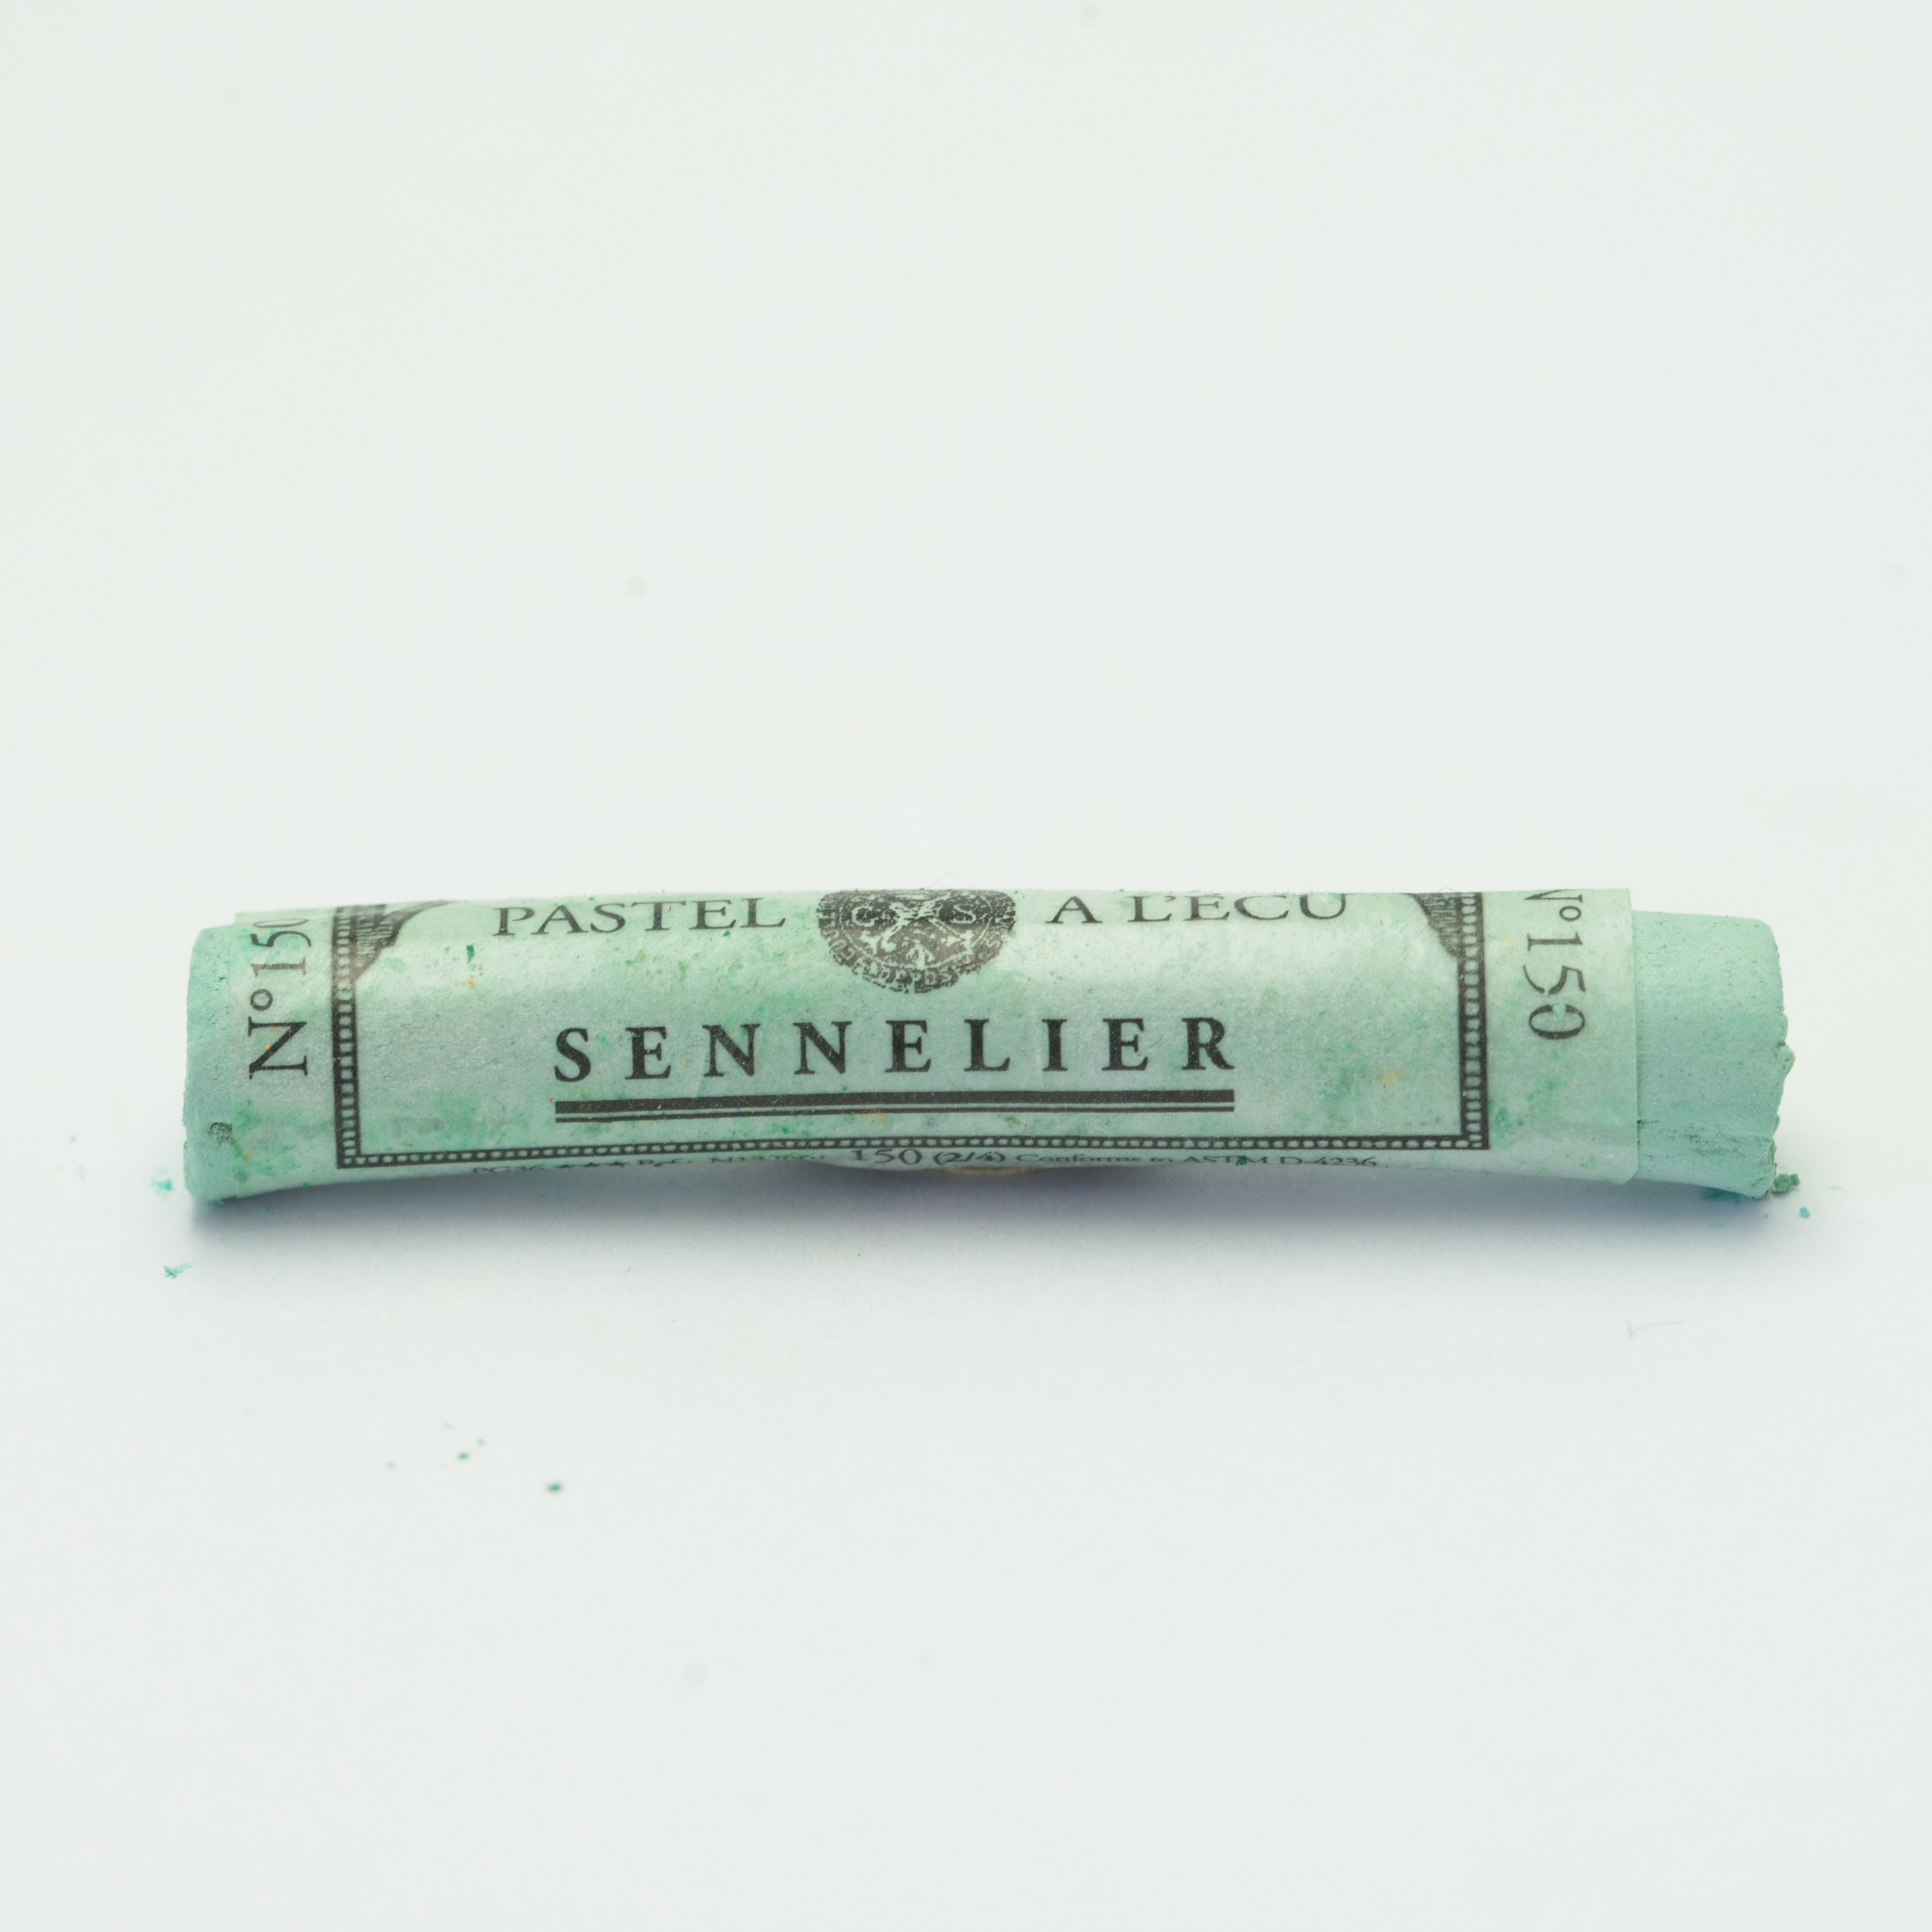 Sennelier Extra Soft Pastels - Lawn Green 150